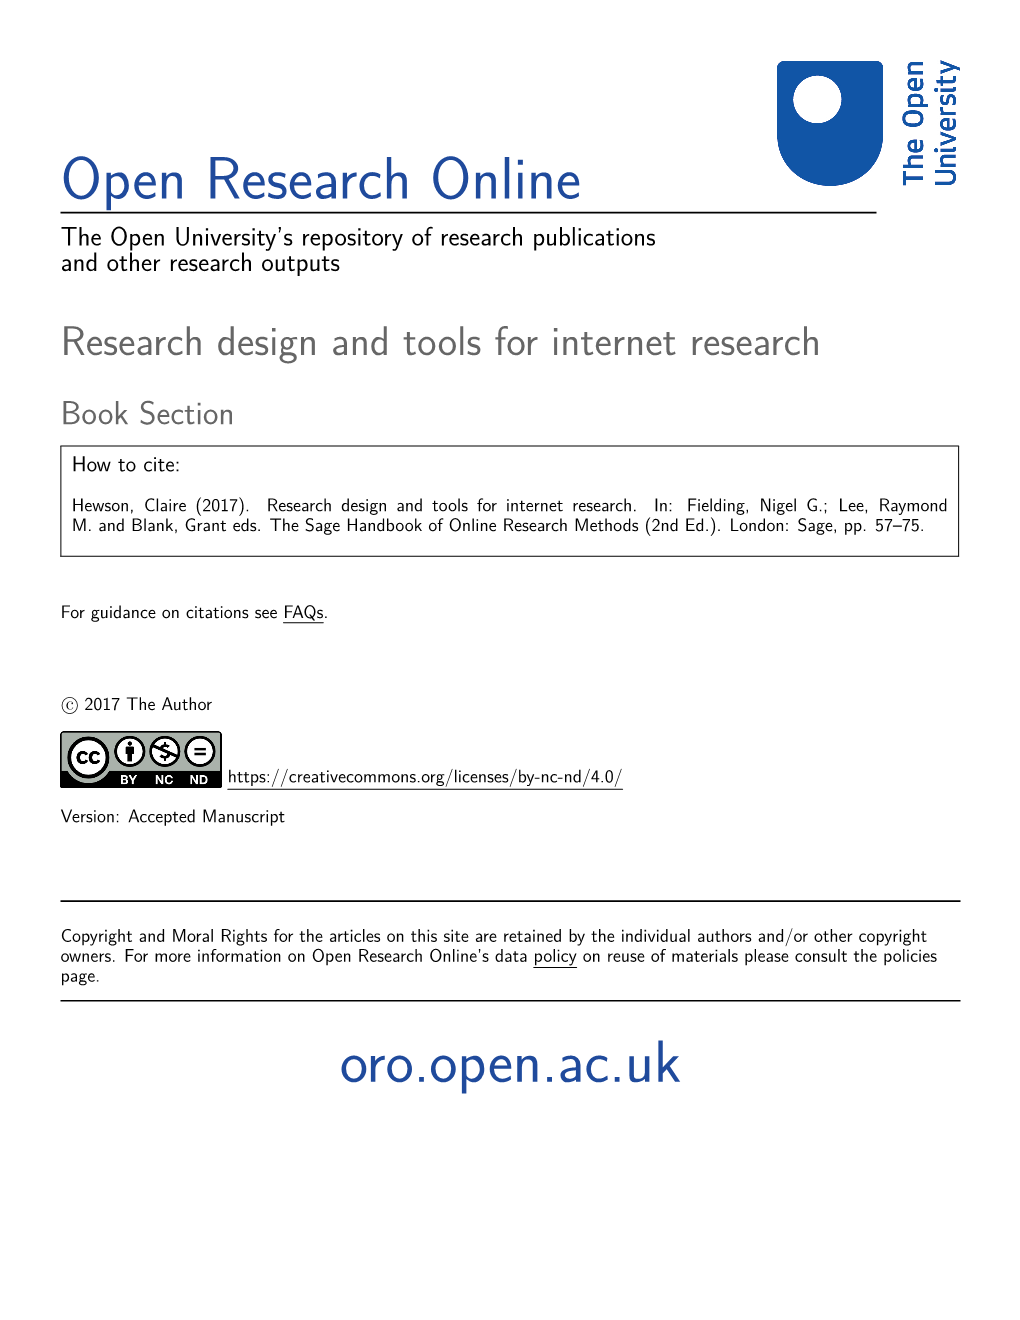 Research Design and Tools for Internet Research